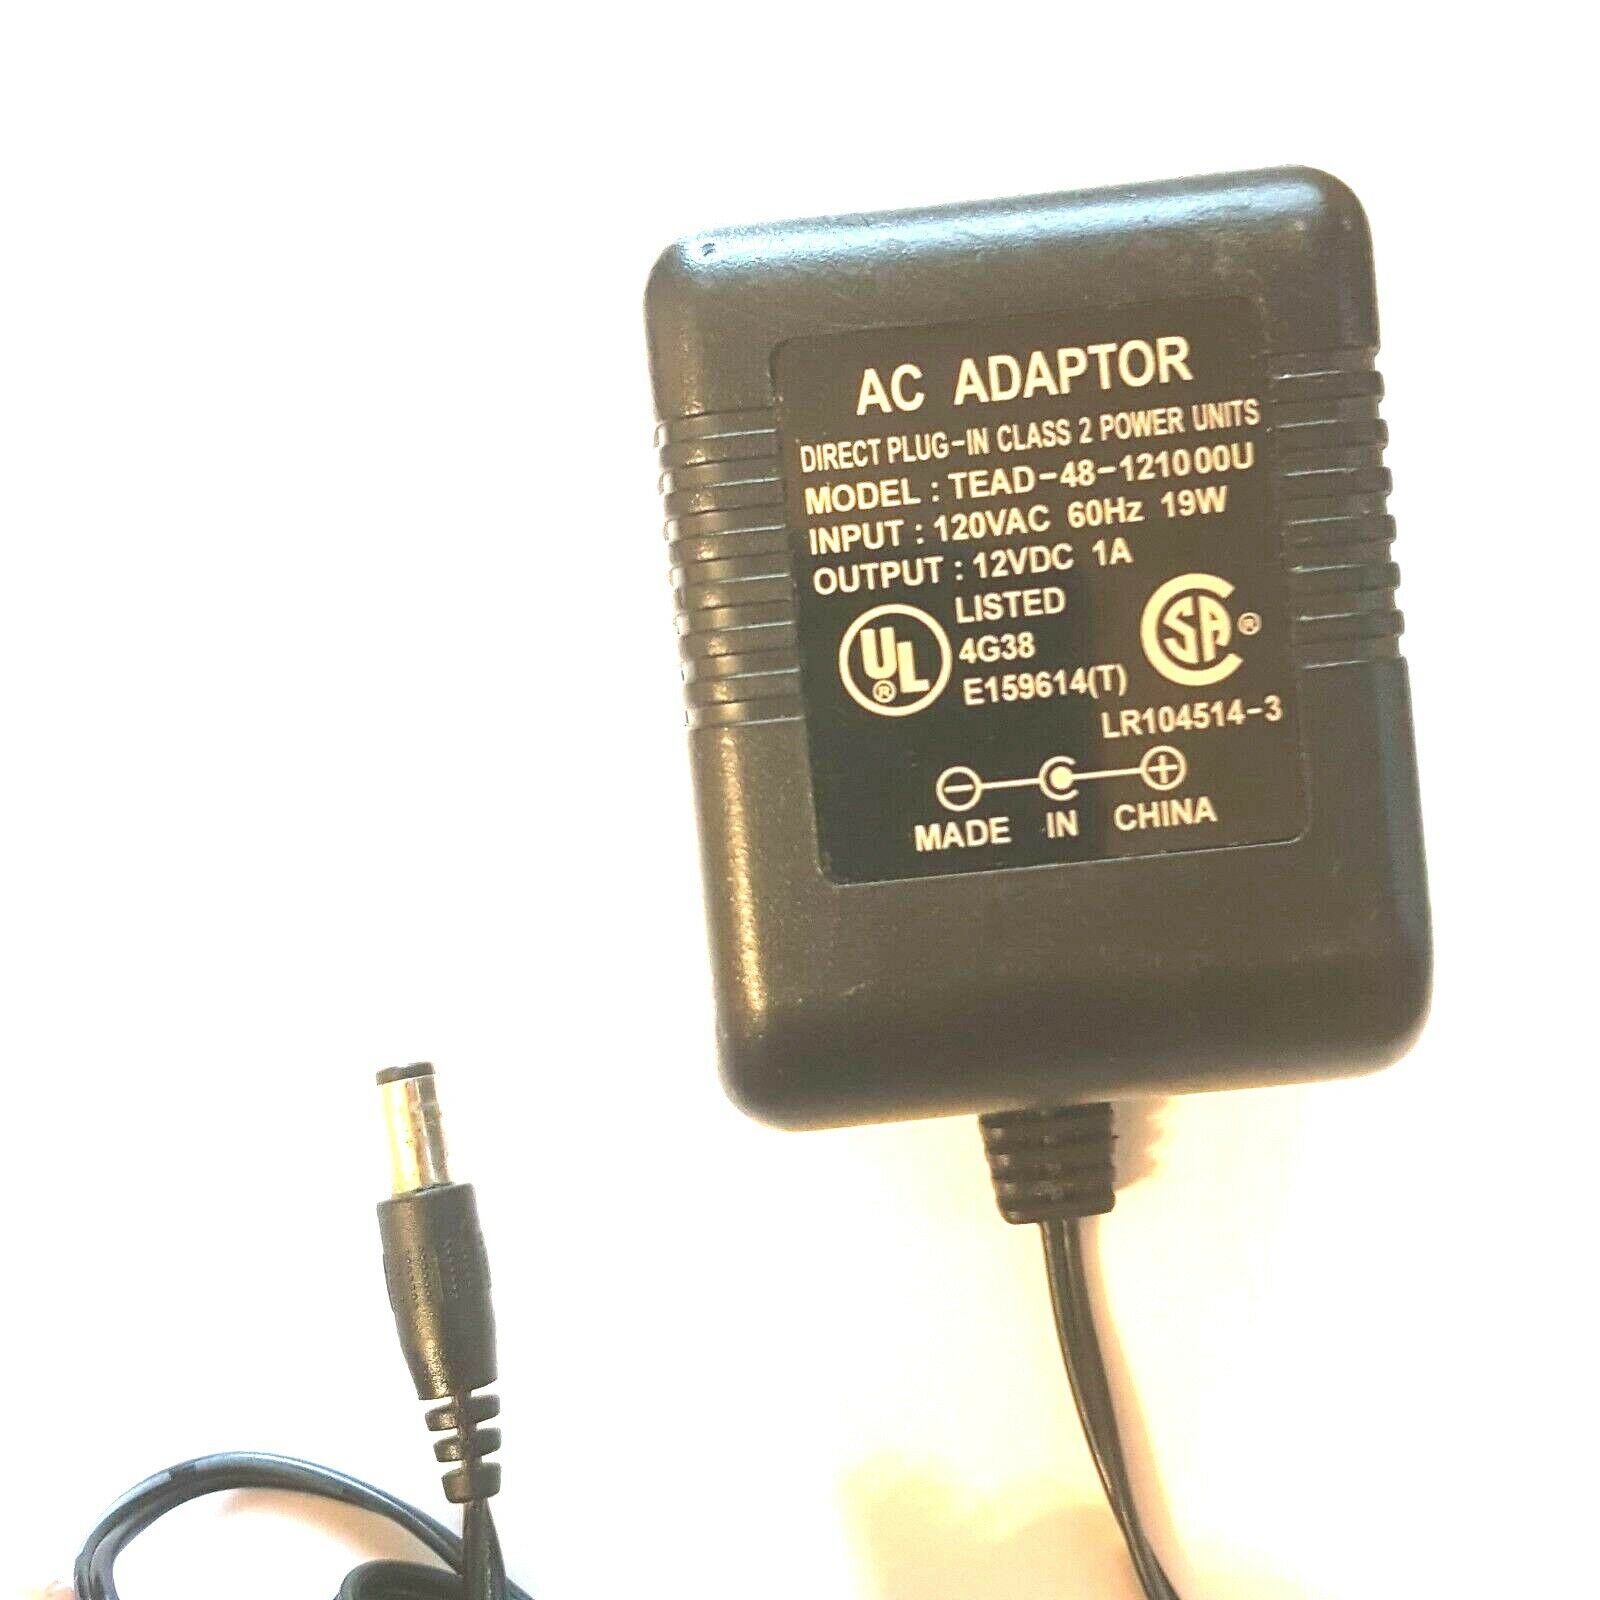 AC Adapter TEAD-48-121000U Power Supply Charger 12 Volts 1A 12V DC Class 2 Transfor power supply